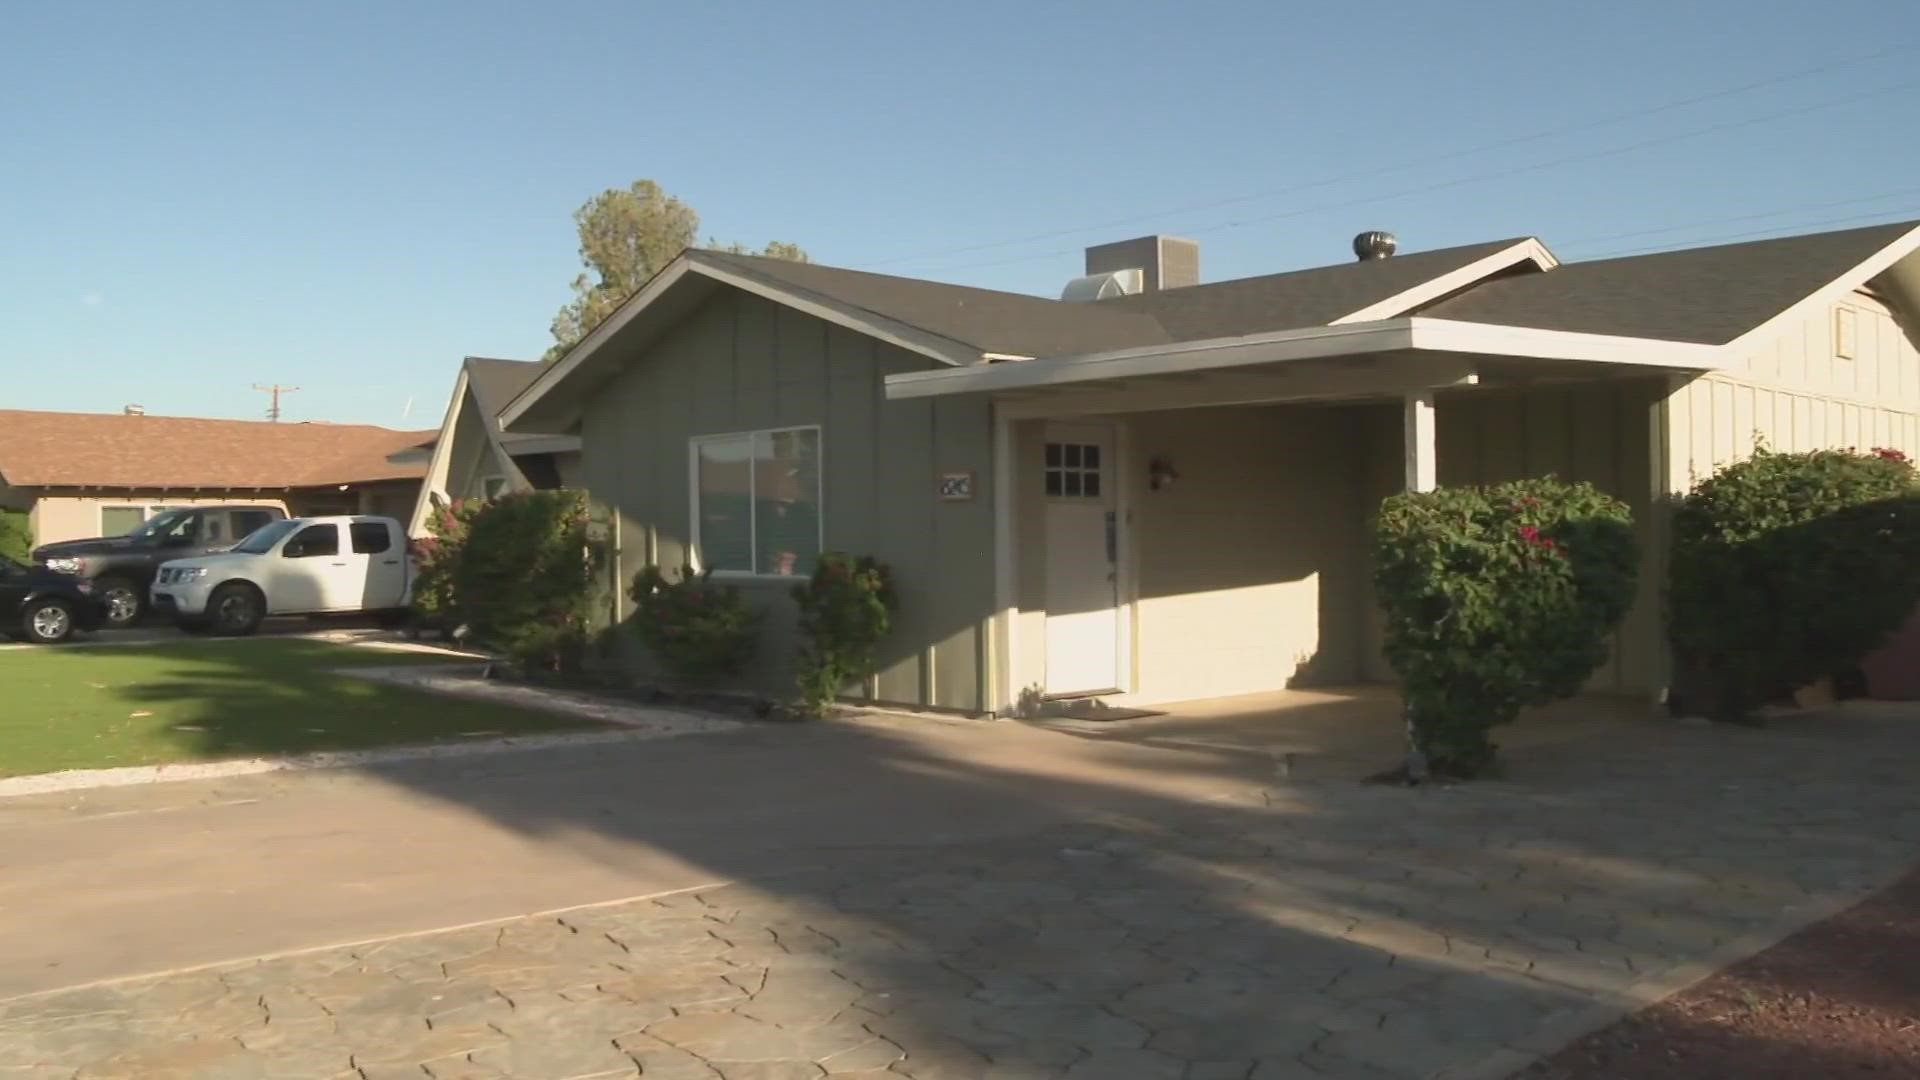 Owners of short-term rentals in Mesa will be required to obtain a license for $250.